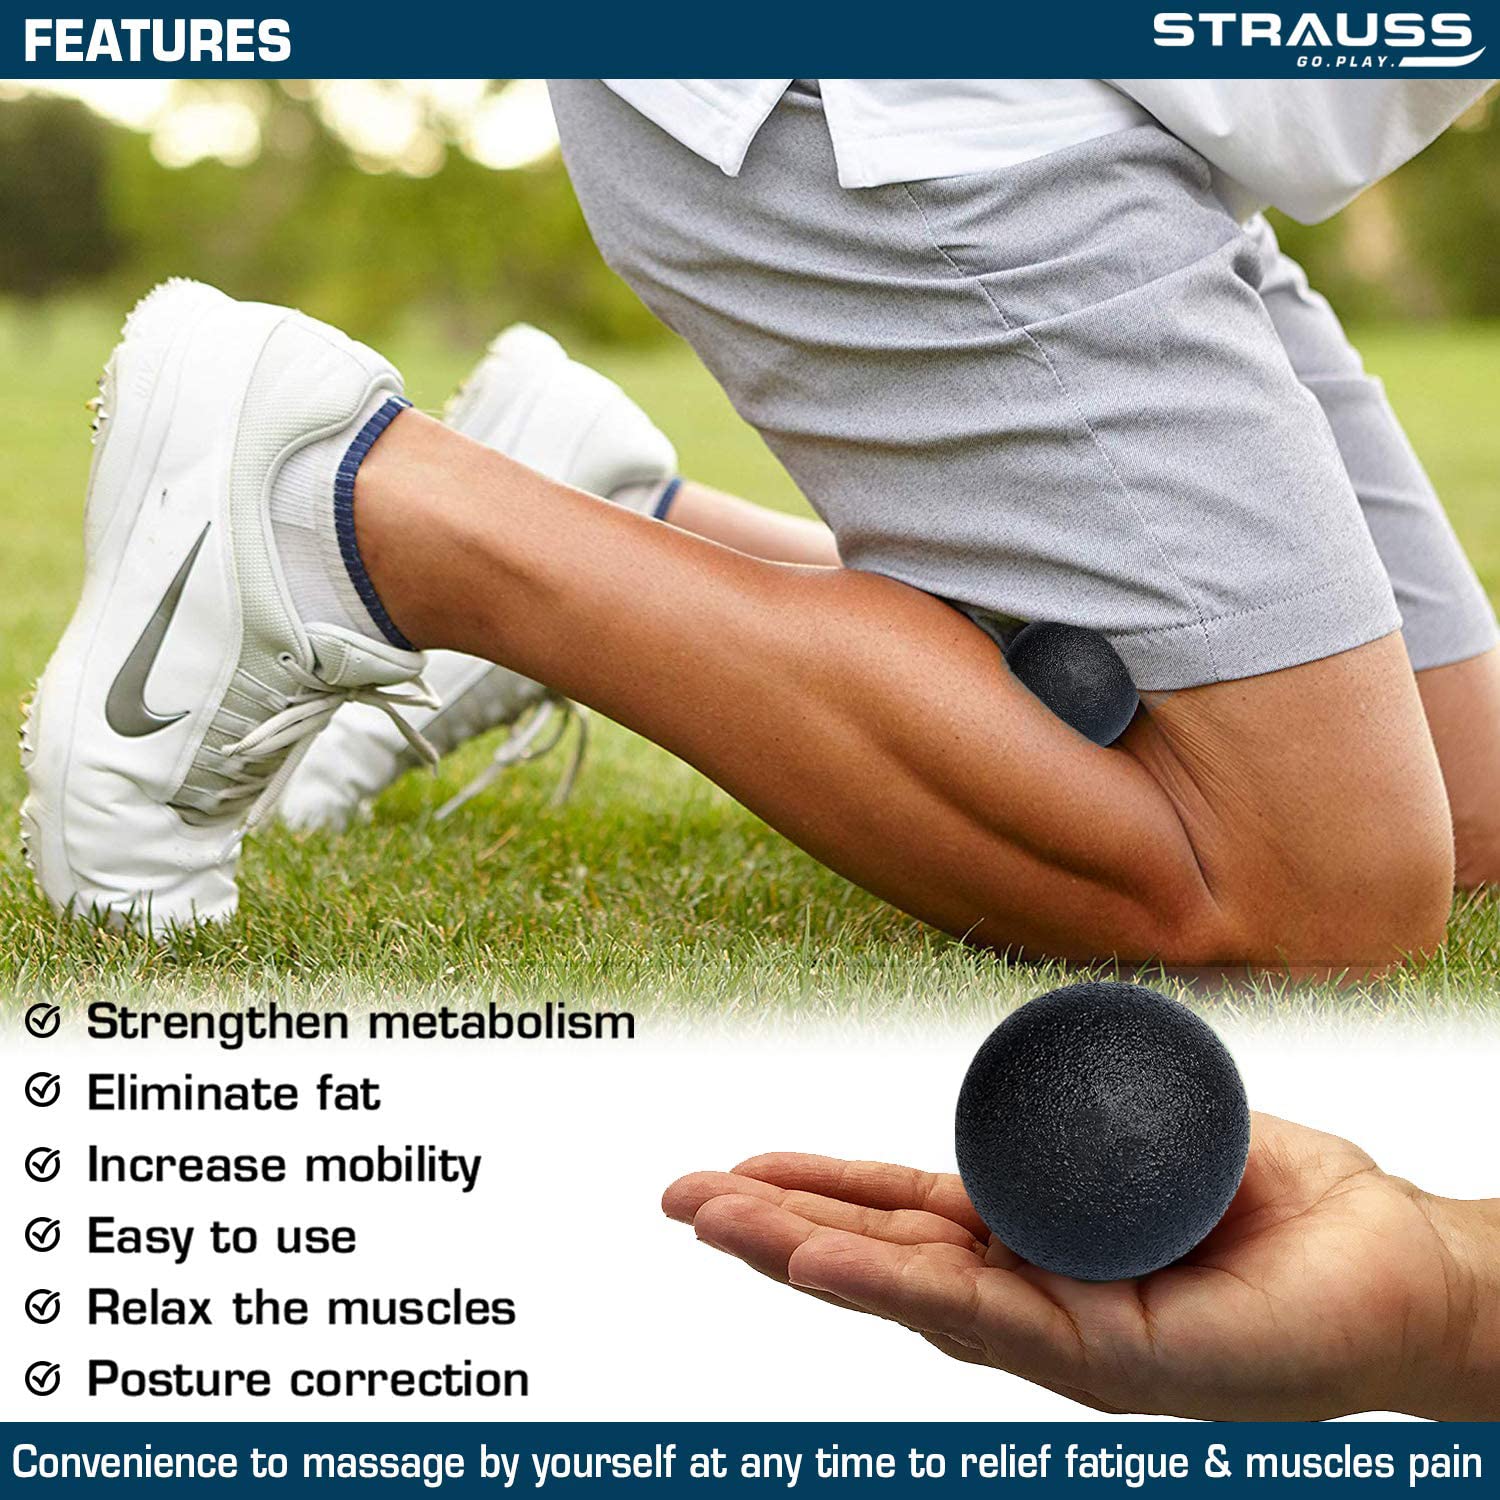 Strauss Yoga & Lacrosse Massage Single Lightweight Peanut Shaped Ball | Ideal for Physiotherapy, Deep Tissue Massage, Trigger Point Therapy, Muscle Knots | High-Density Roller & Acupressure Ball for Myofascial Release & Pain Relief, (Black)